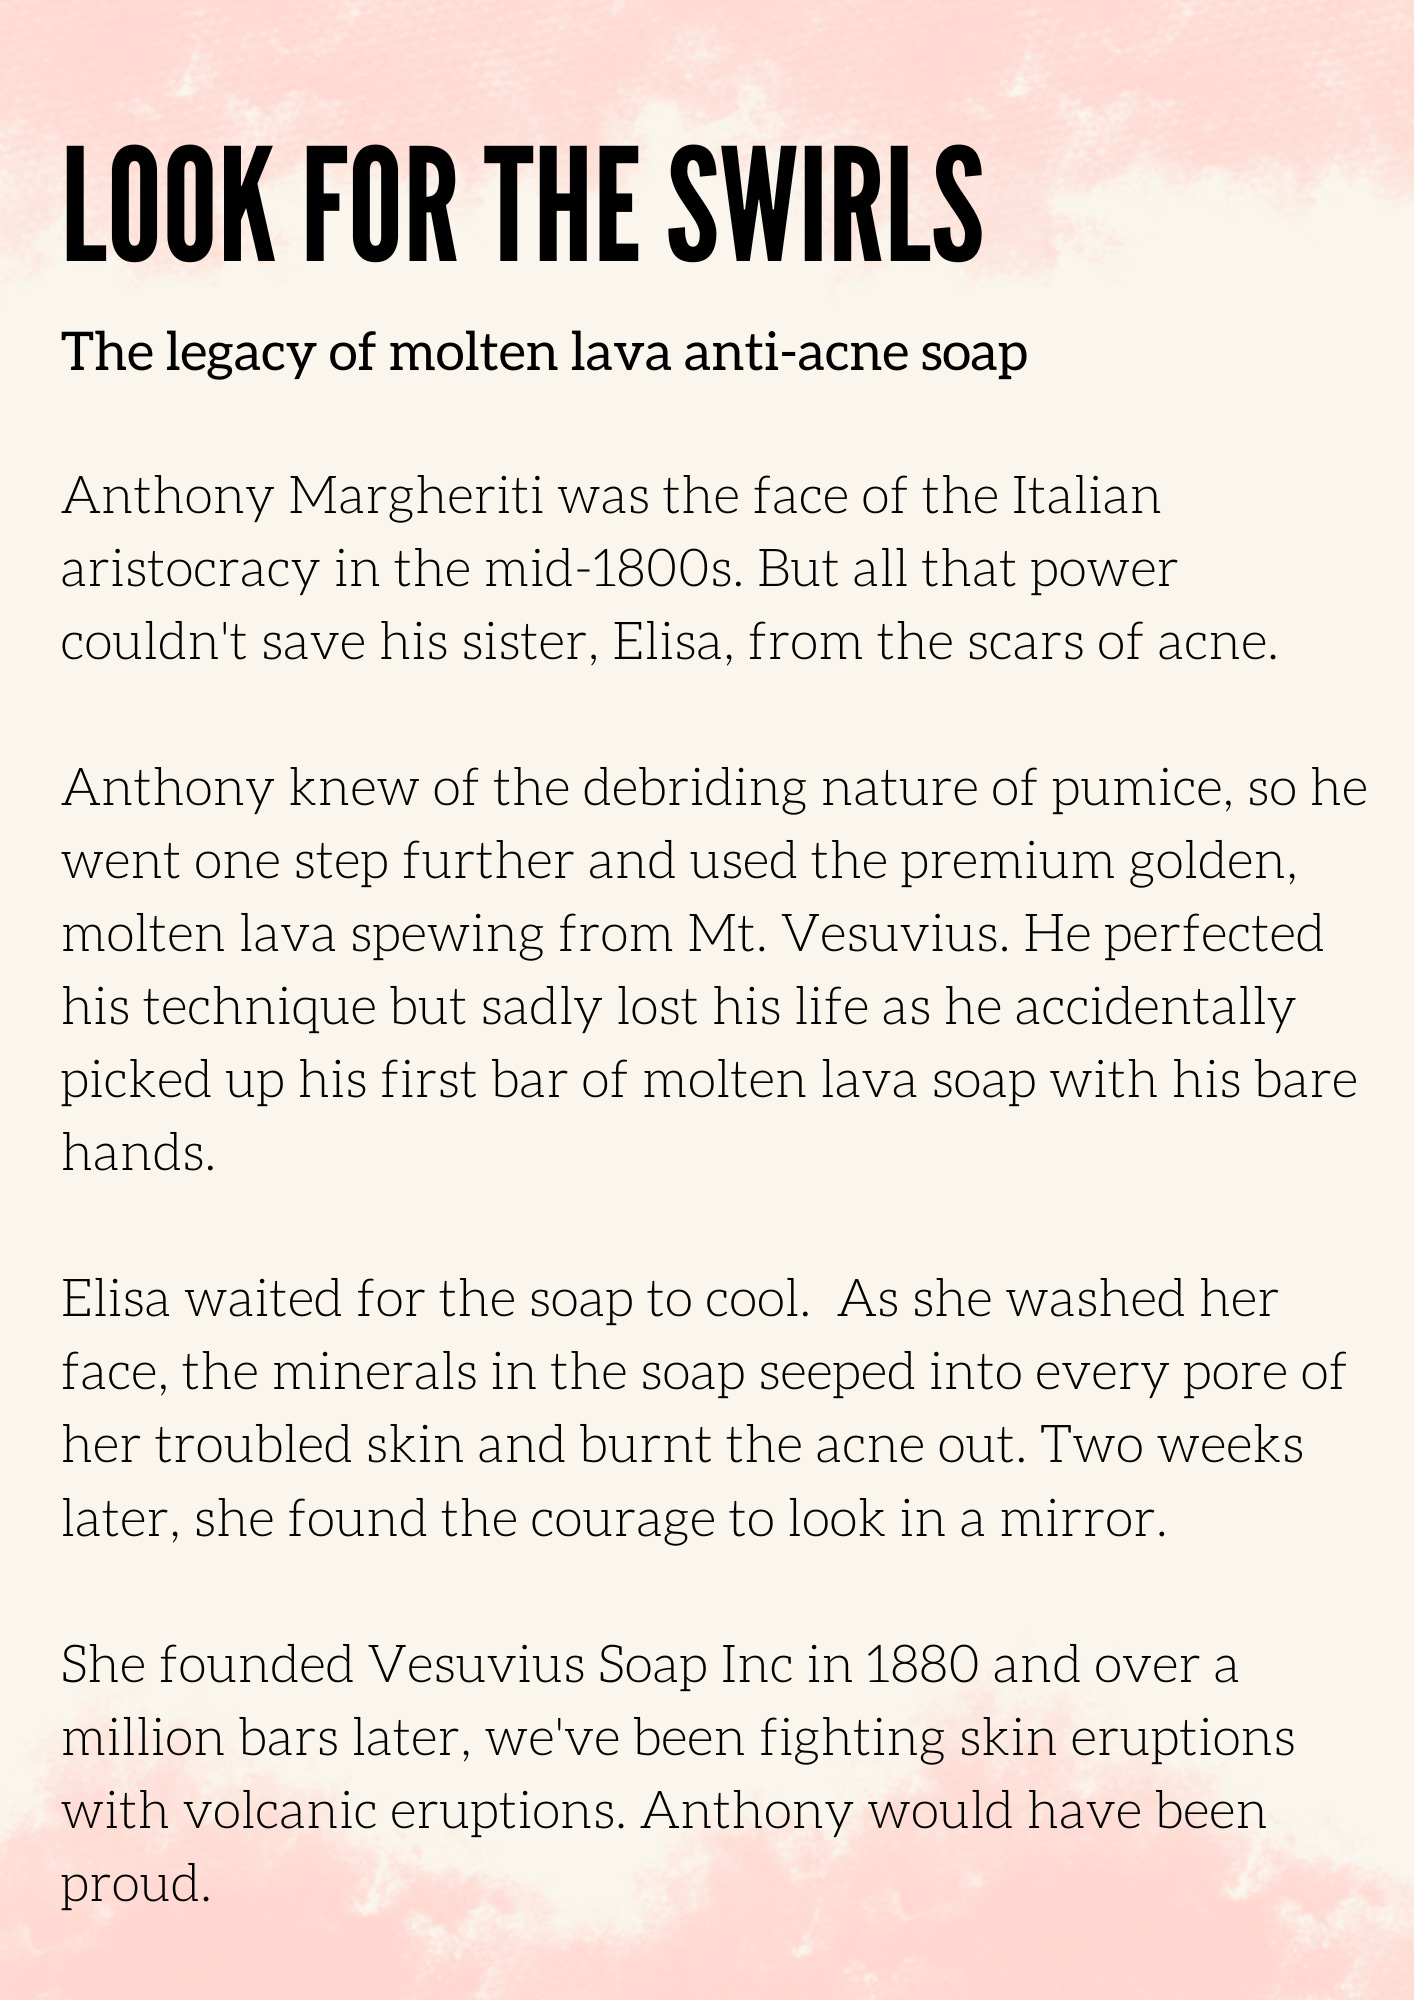 A spec ad made explaining the history of the fictitious anti-acne soap